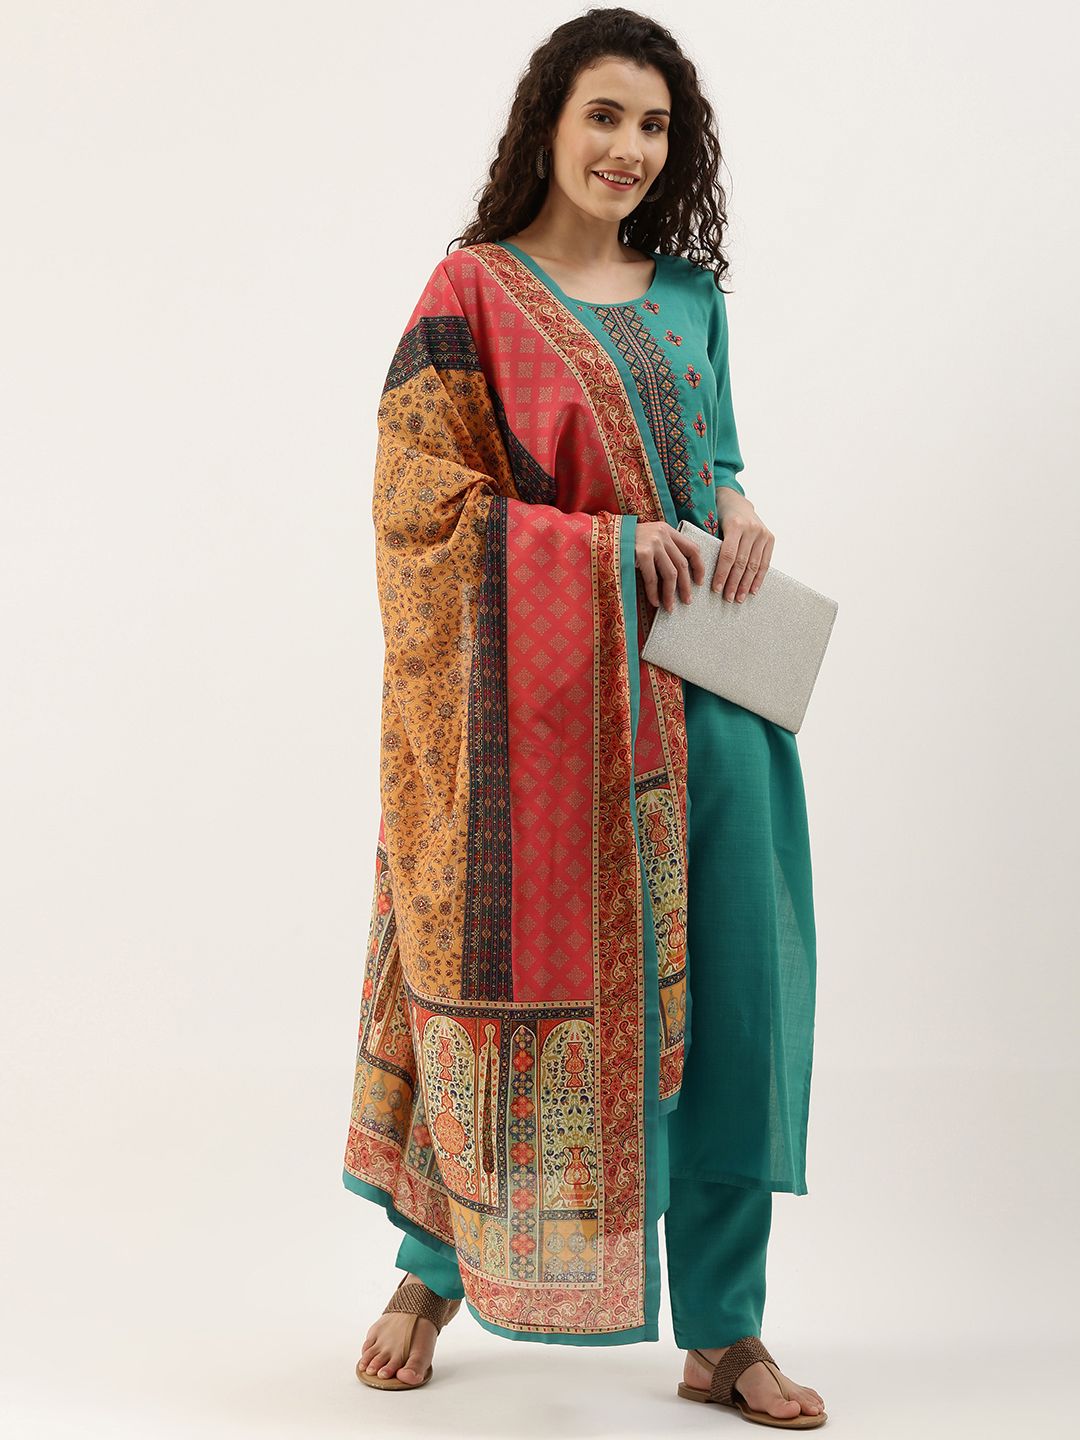 SheWill Teal Green Embroidered Unstitched Dress Material Price in India